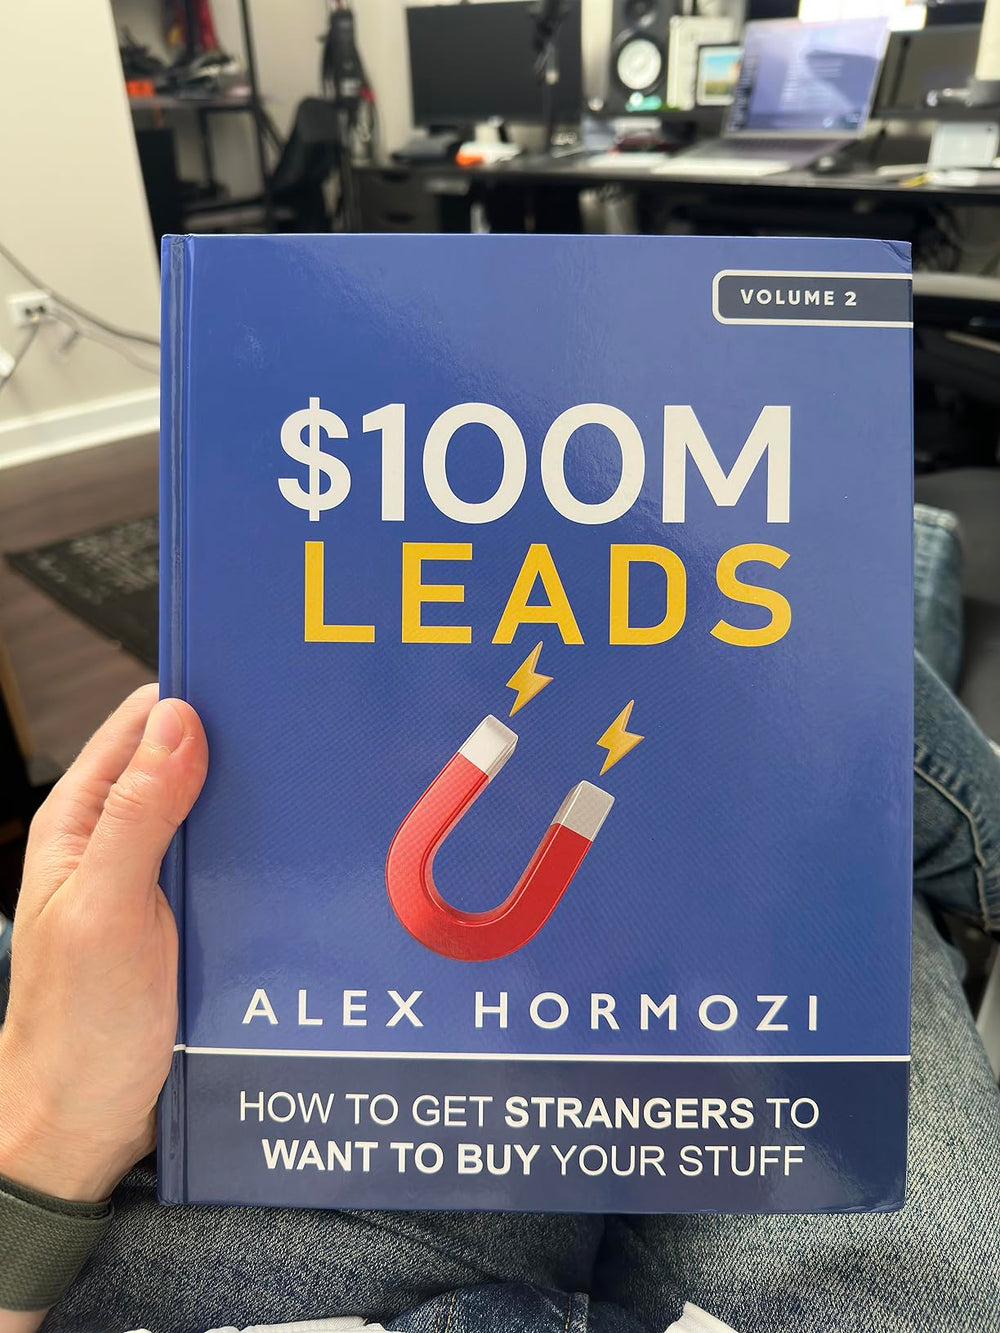 $100M Leads by Alex Hormozi (What to Expect), $100 Million Series